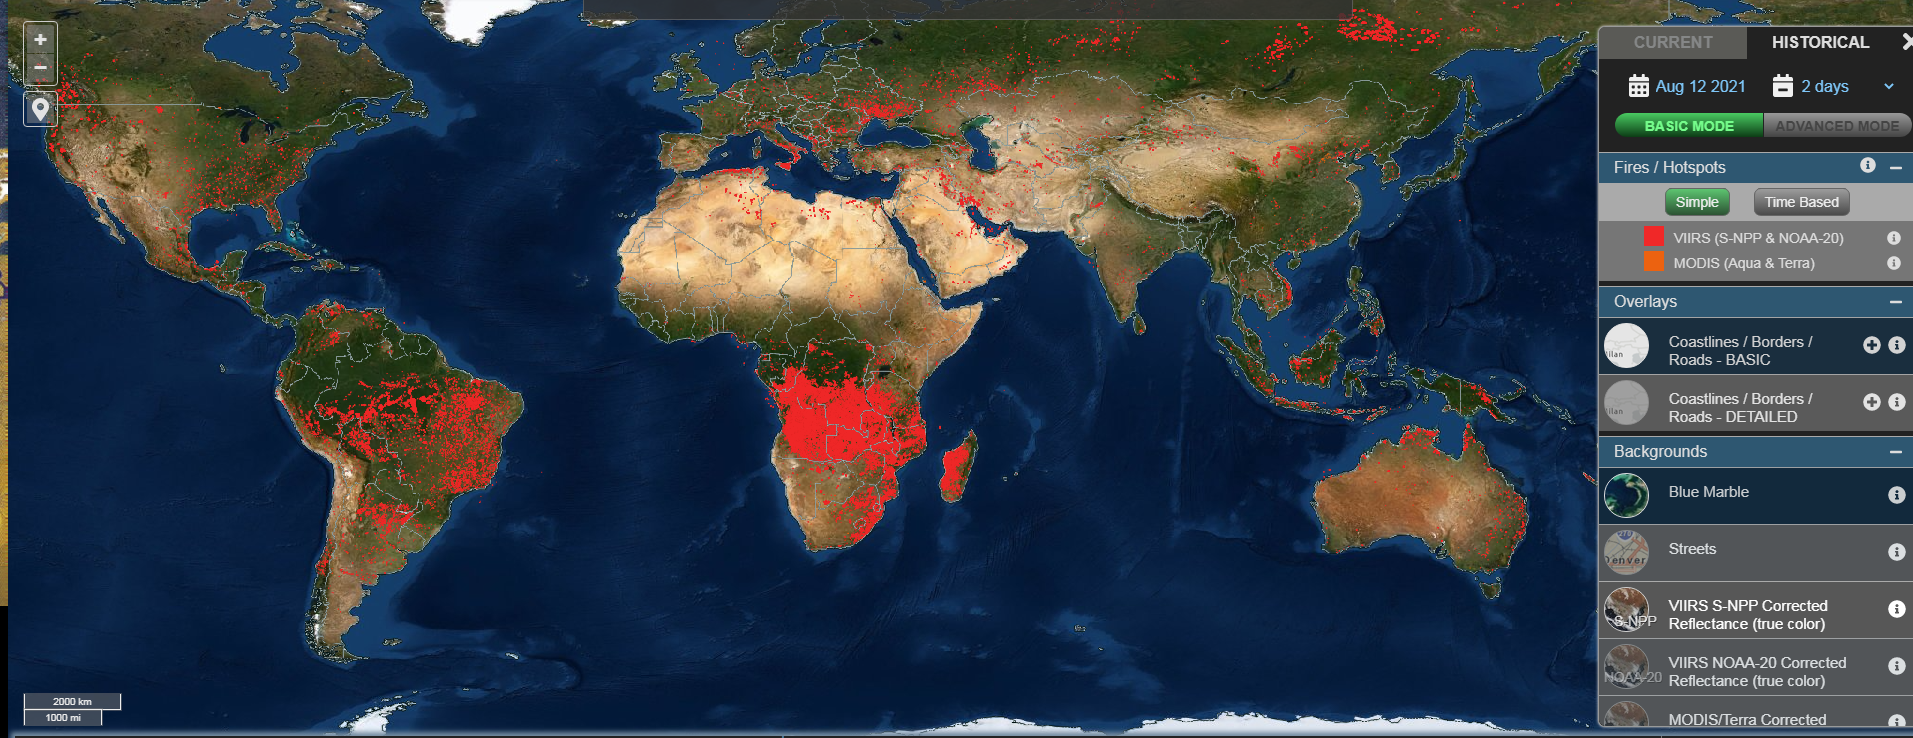 NASA has published a map of fires on Earth